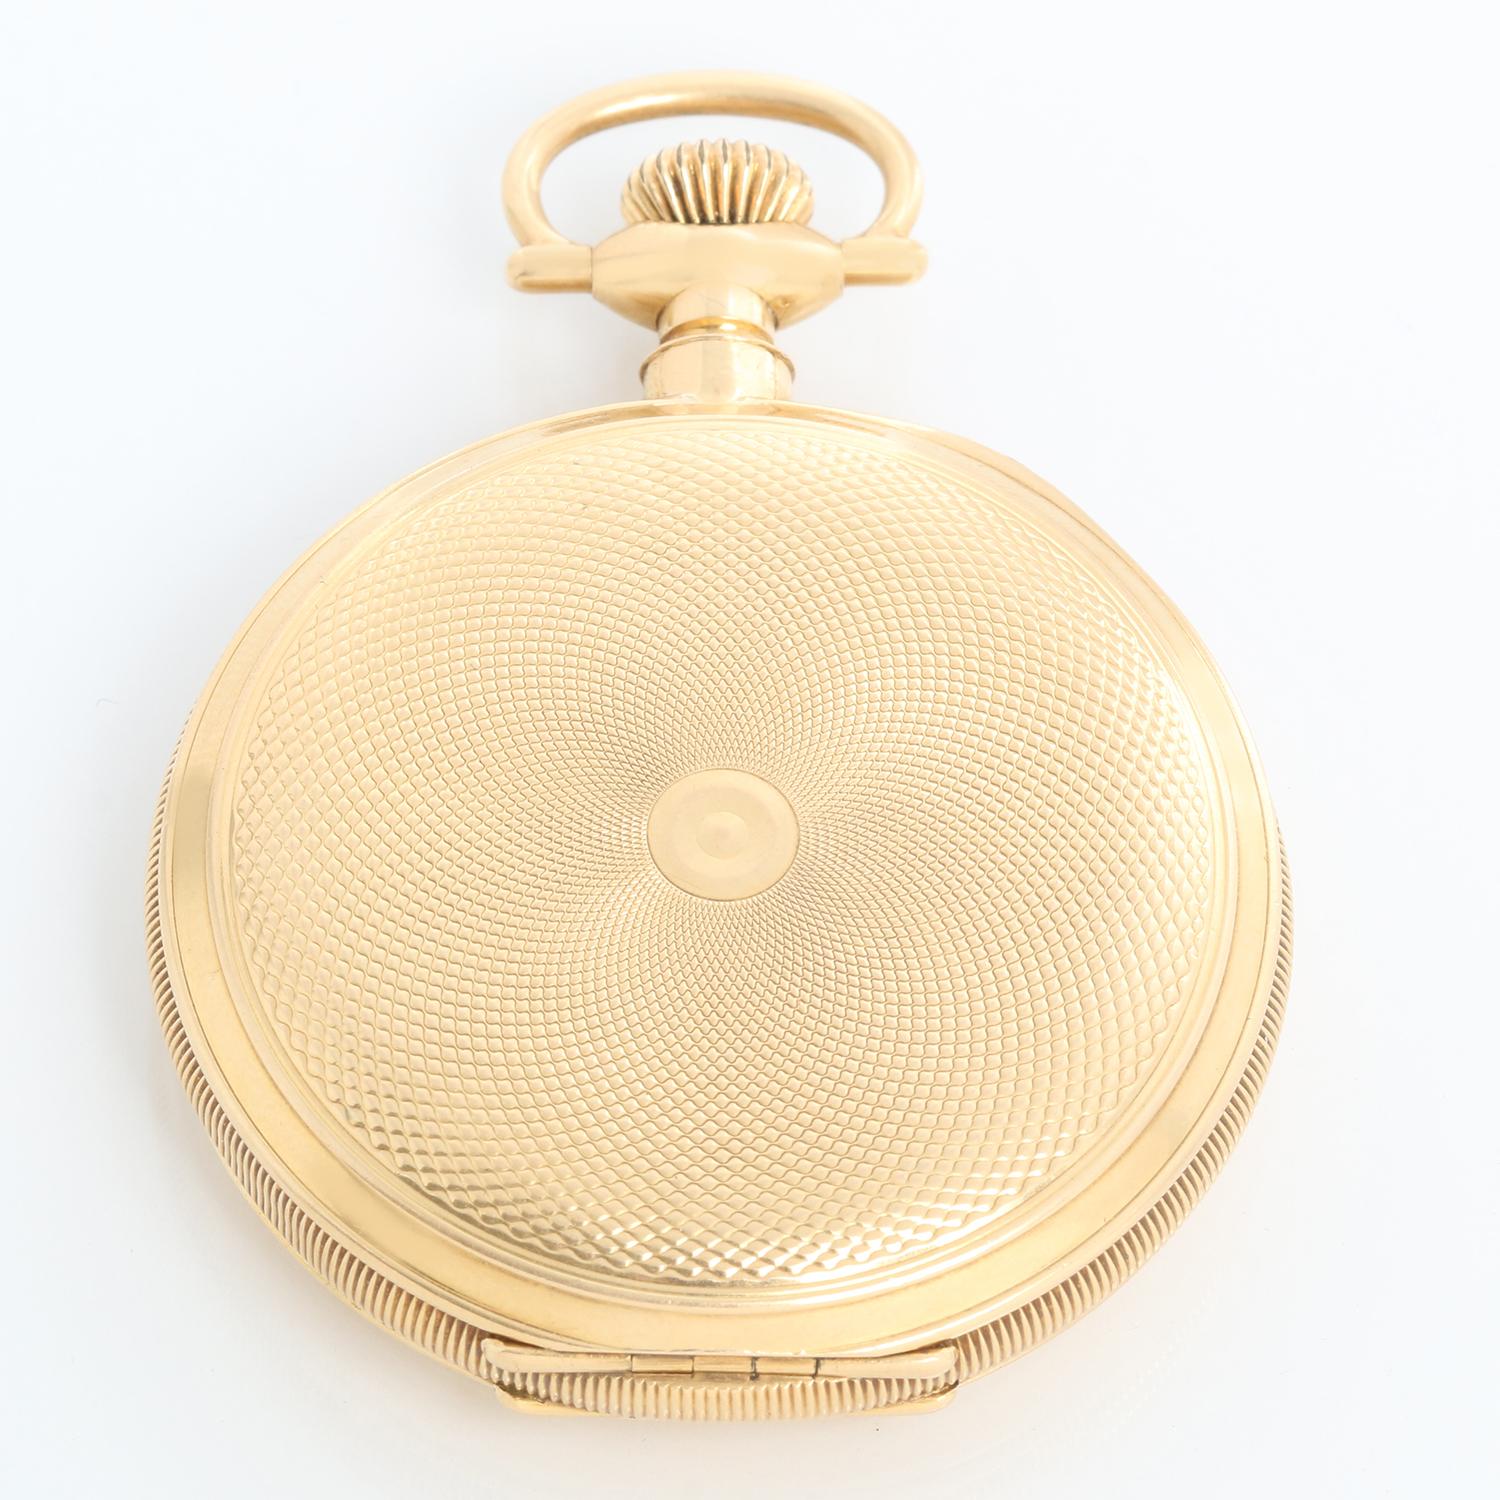 E. Howard Watch Co. 18K Yellow Gold Pocket Watch - Manual winding; 23 jewels . 18K Yellow Gold  ( 49 mm ) with an initial crest engraved in the back . White dial with Roman numerals and sub dial at 6 o'clock. Pre-owned with custom box. Very rare